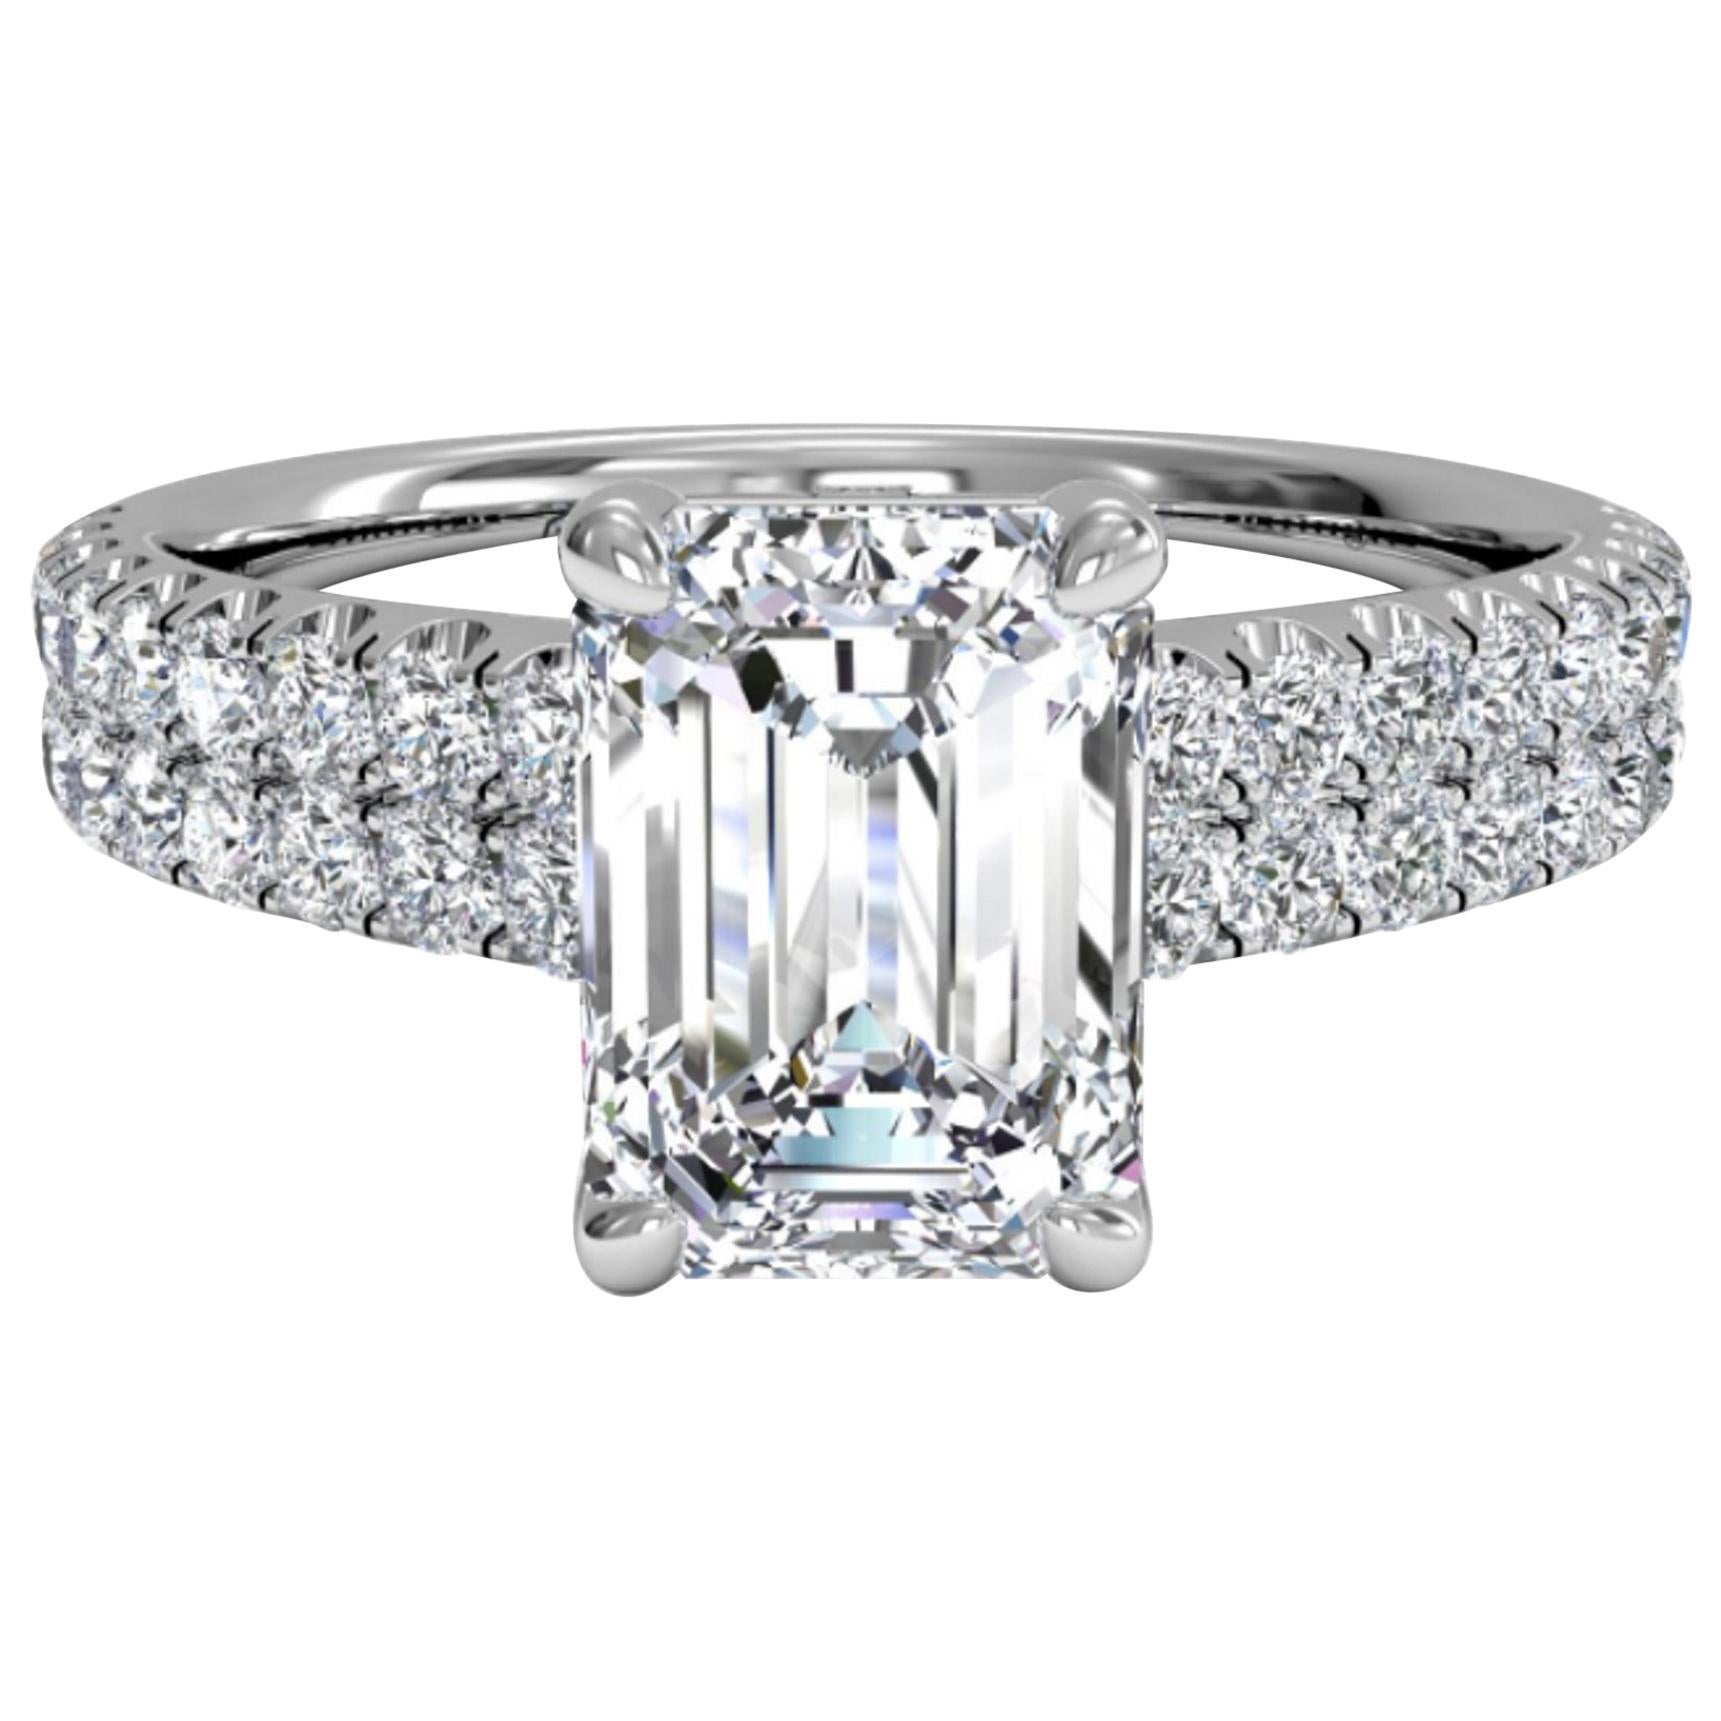 GIA Certified 2 Carat Emerald Cut Diamond Pave Ring VVS1 Clarity D Color For Sale